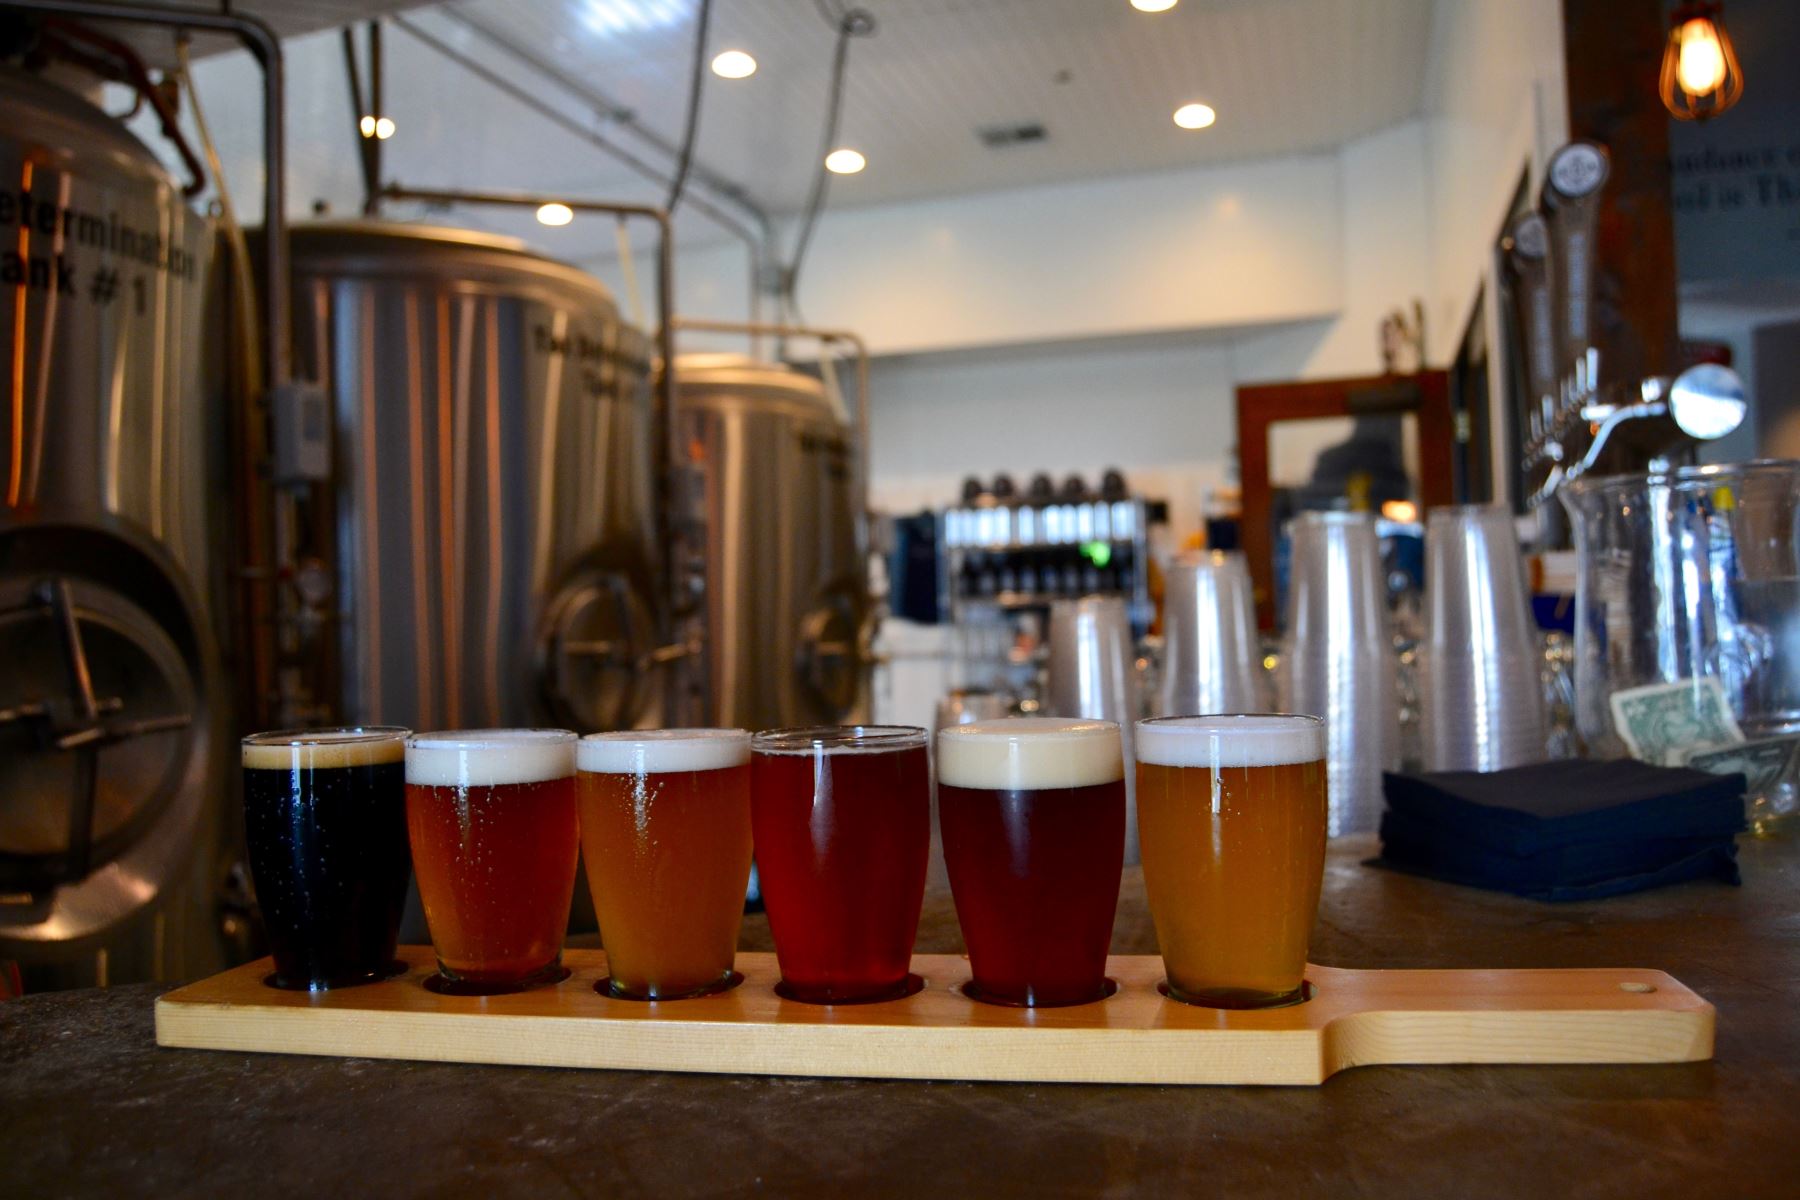 Enjoy a beer at Hog Island Brewery in Orleans, MA during your vacation at a Nauset Rental property  delicious beer, food and a family friendly environment. 